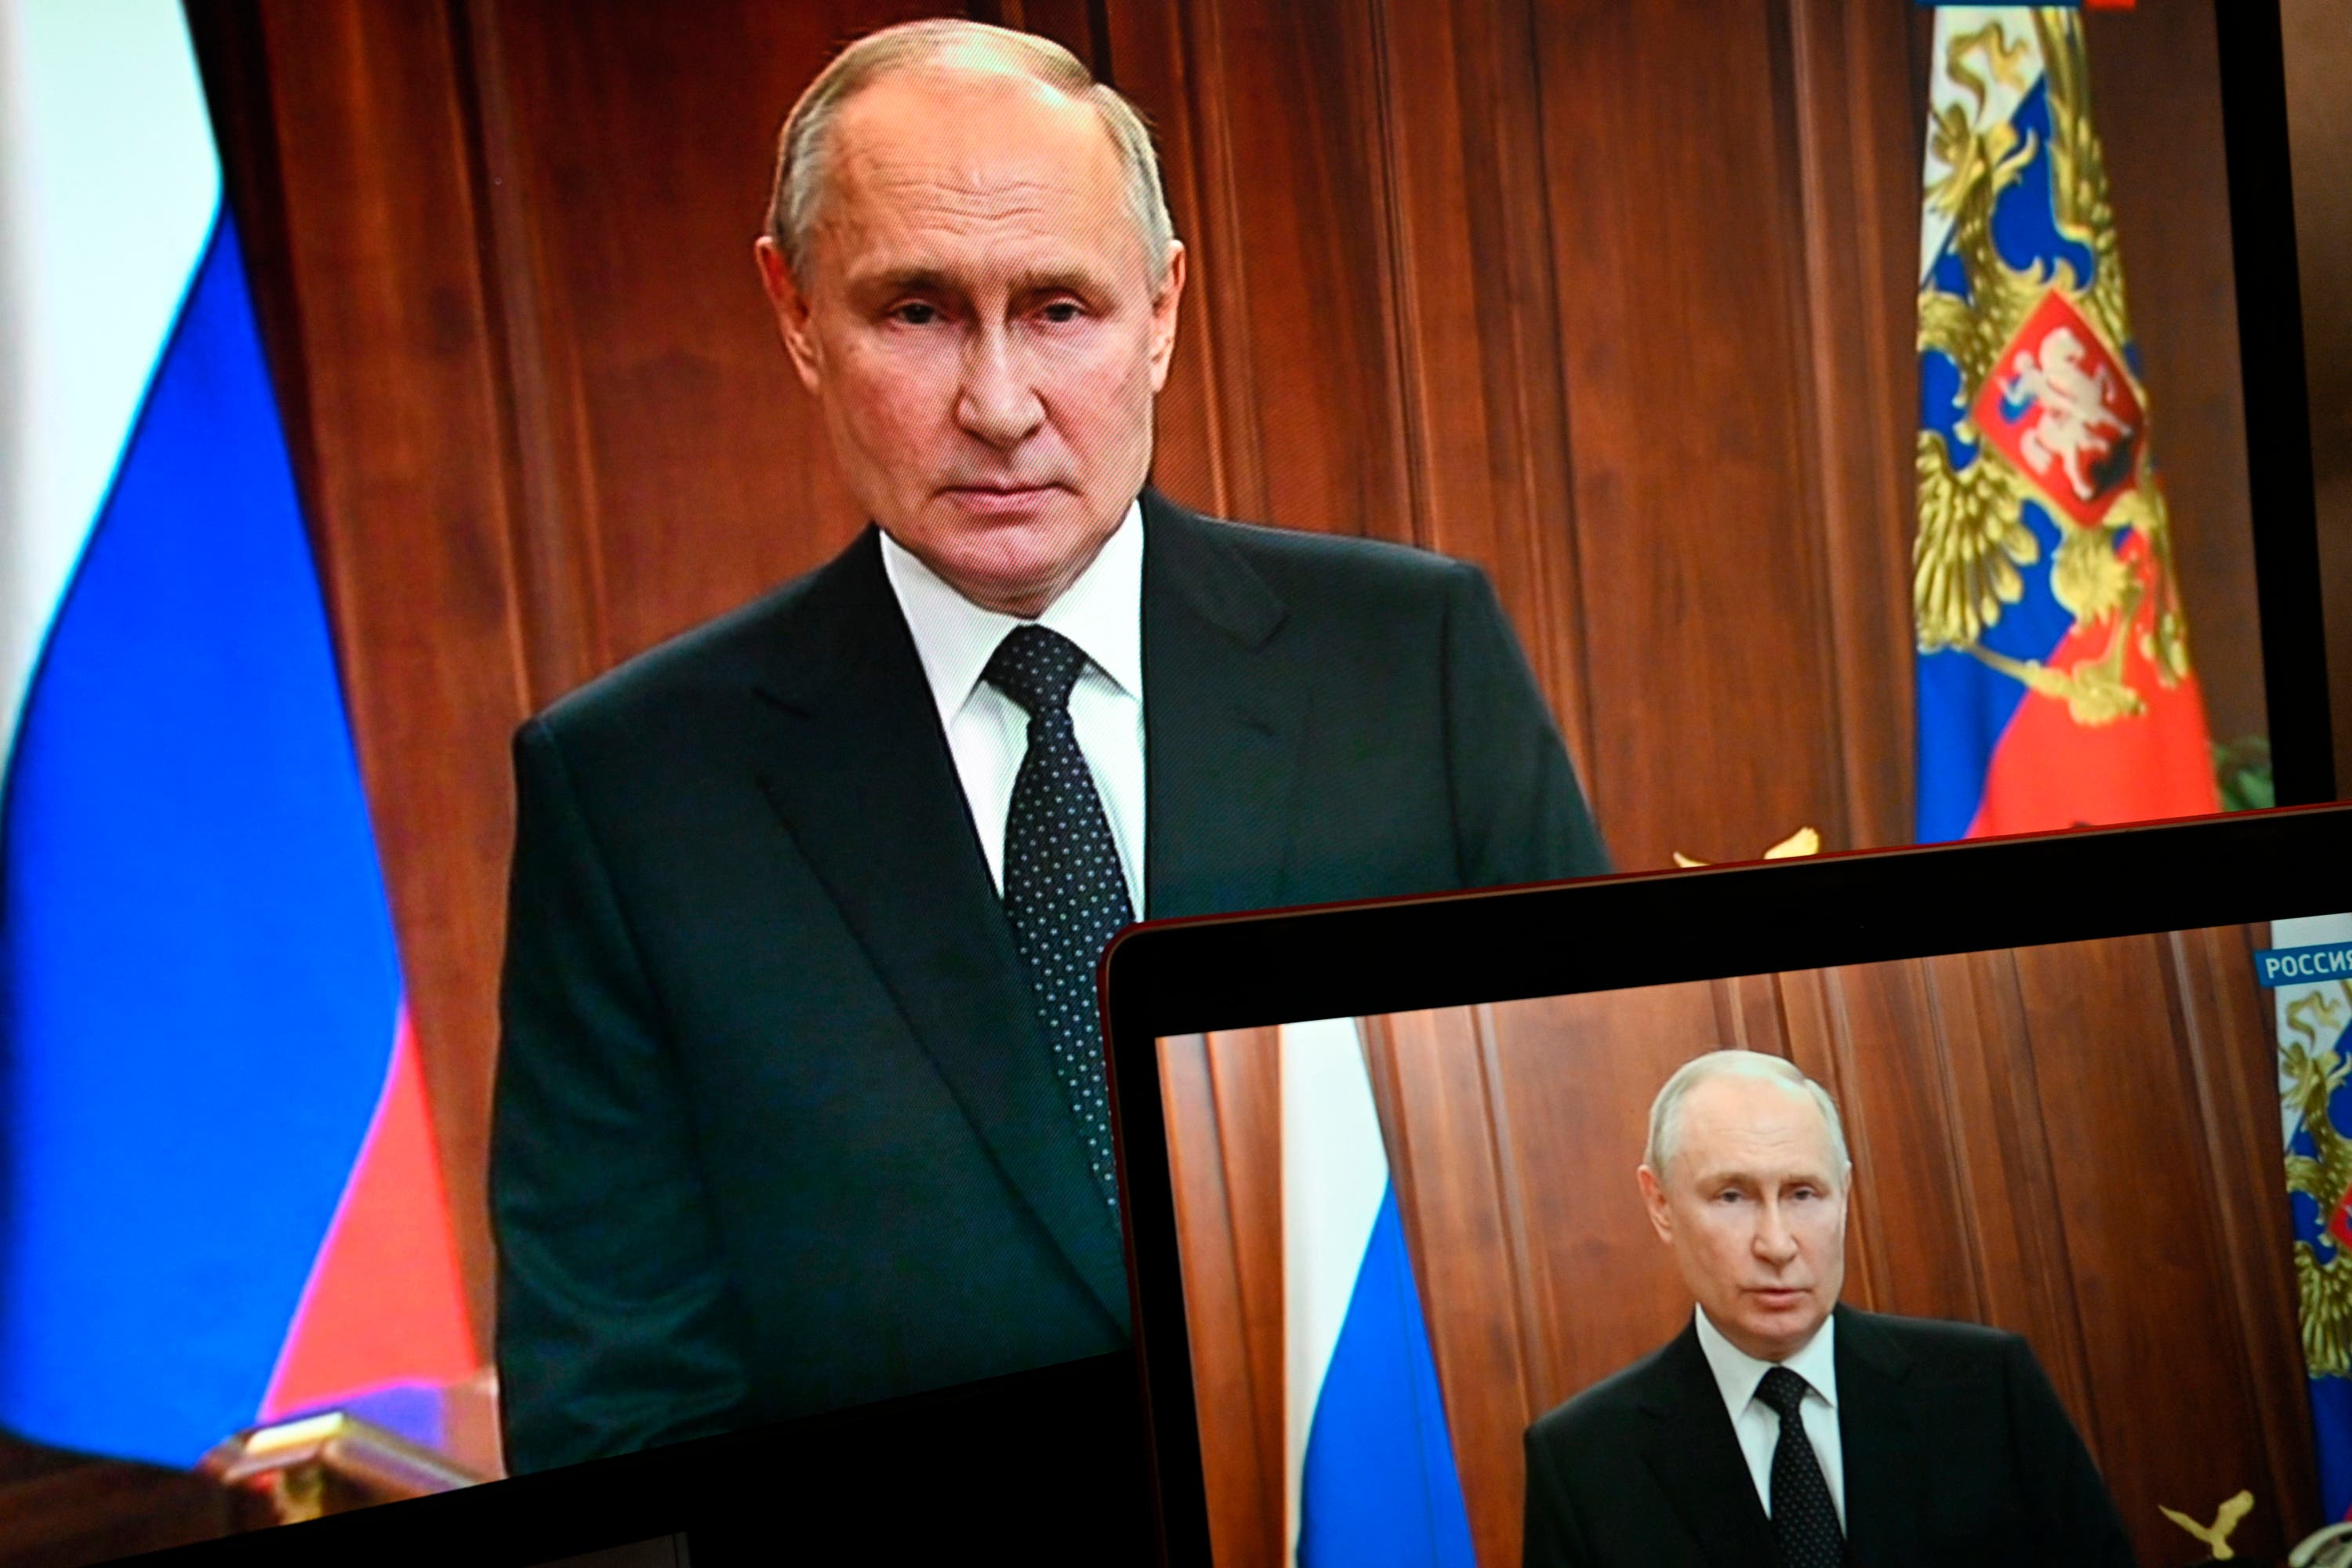 Mr Putin addressed the nation on Saturday before the rebellion was called off.